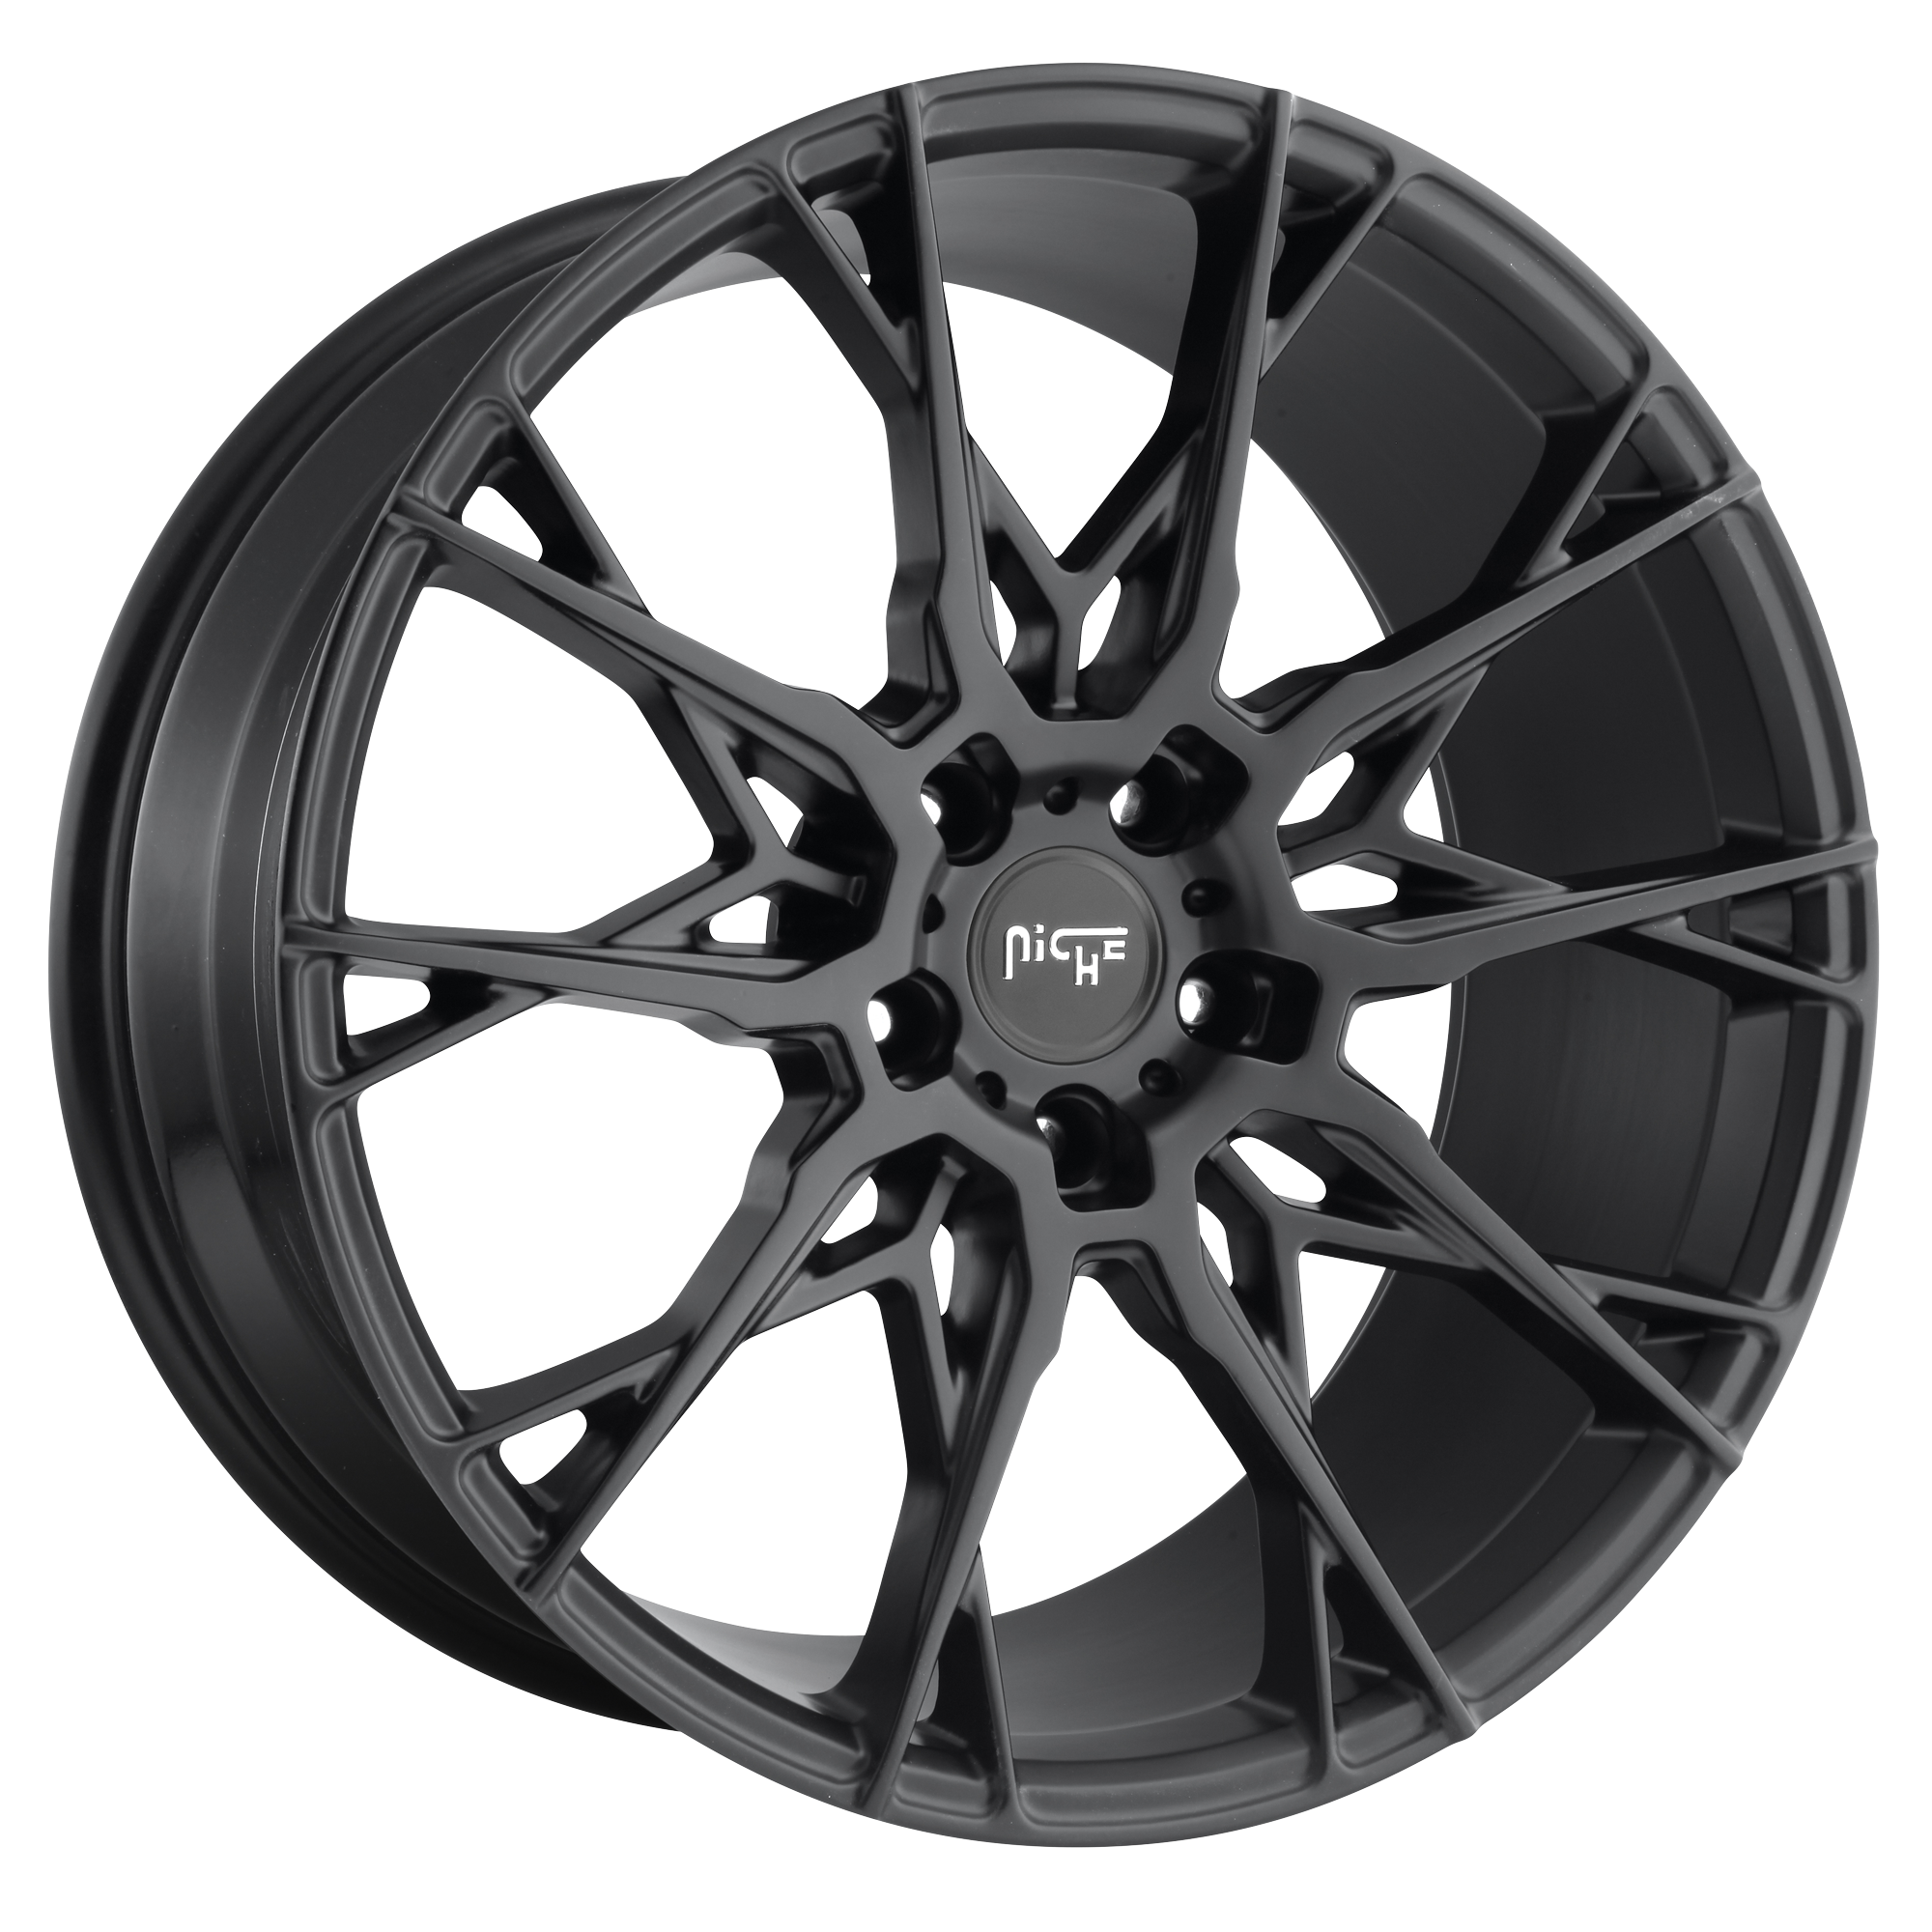 STACCATO 18x8.5 5x120.00 MATTE BLACK (35 mm) - Tires and Engine Performance